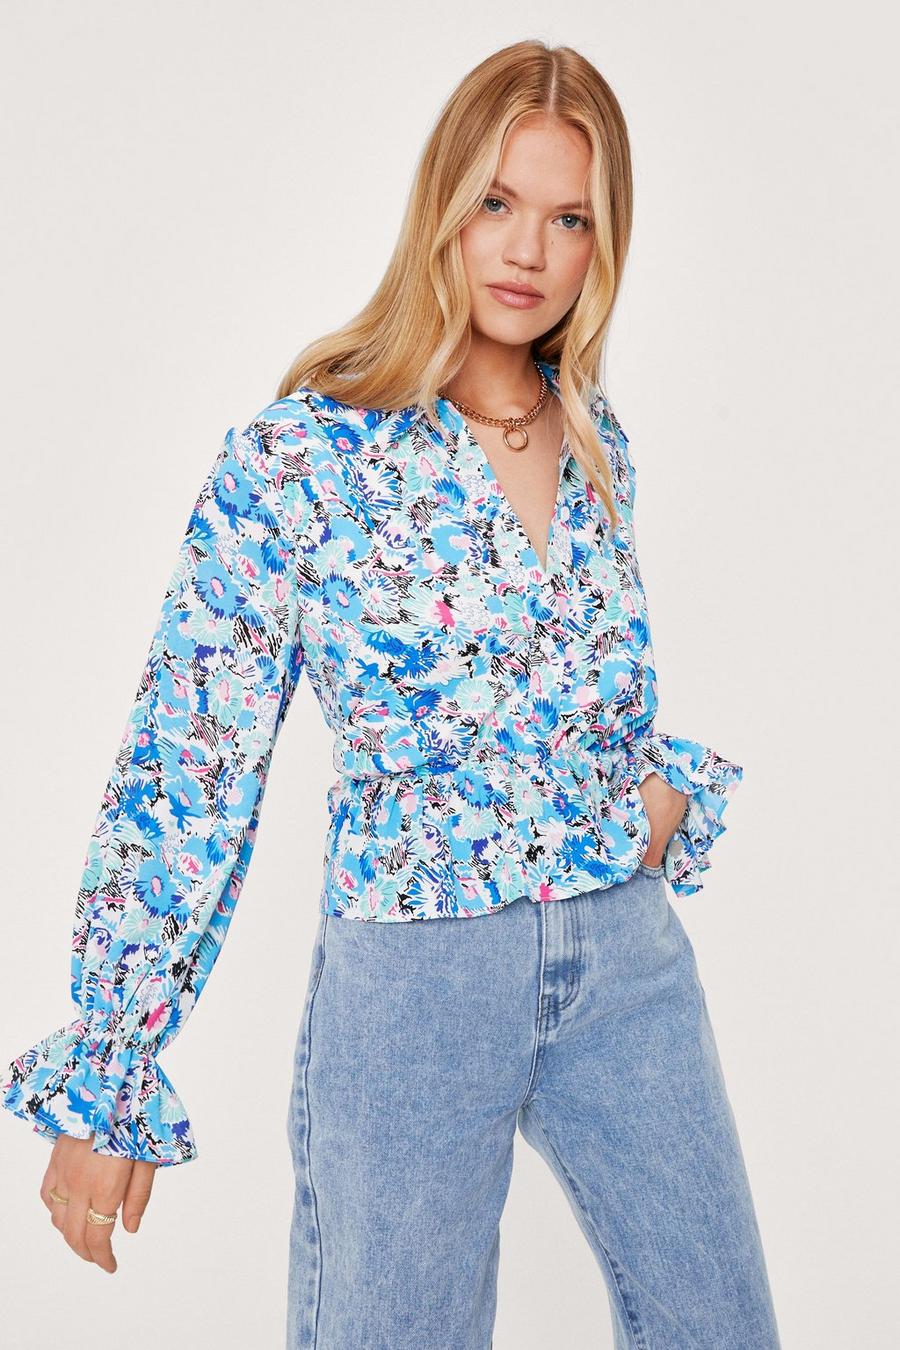 Floral Print Shoulder Padded Ruffle Blouse